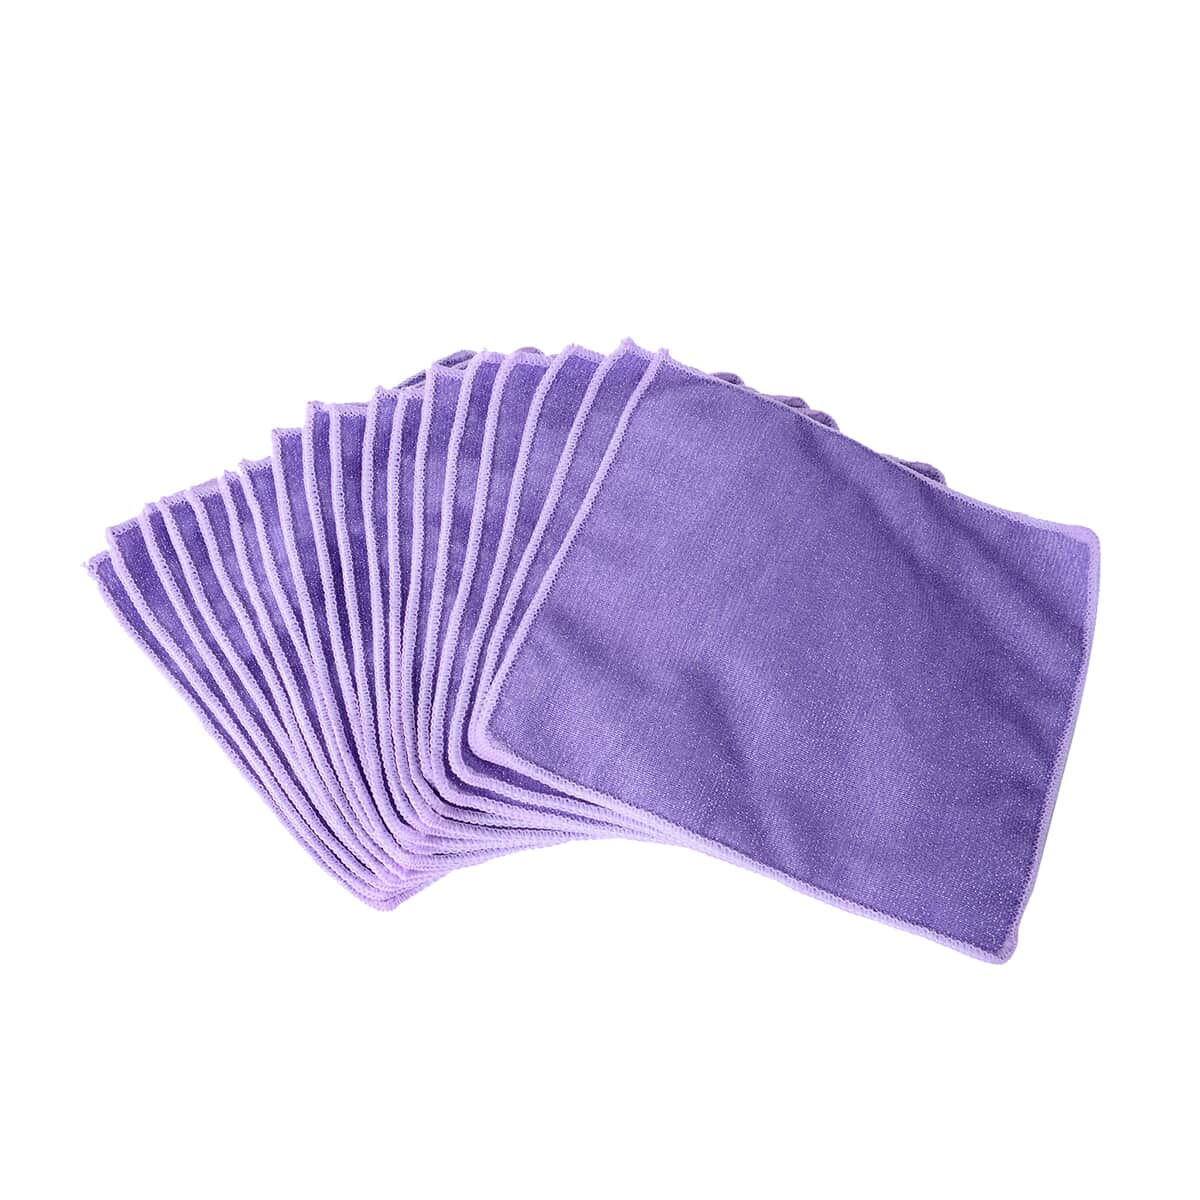 Homesmart Set of 20 Purple Double Sided Microfiber and Scratch Fiber Dish Cloth image number 4